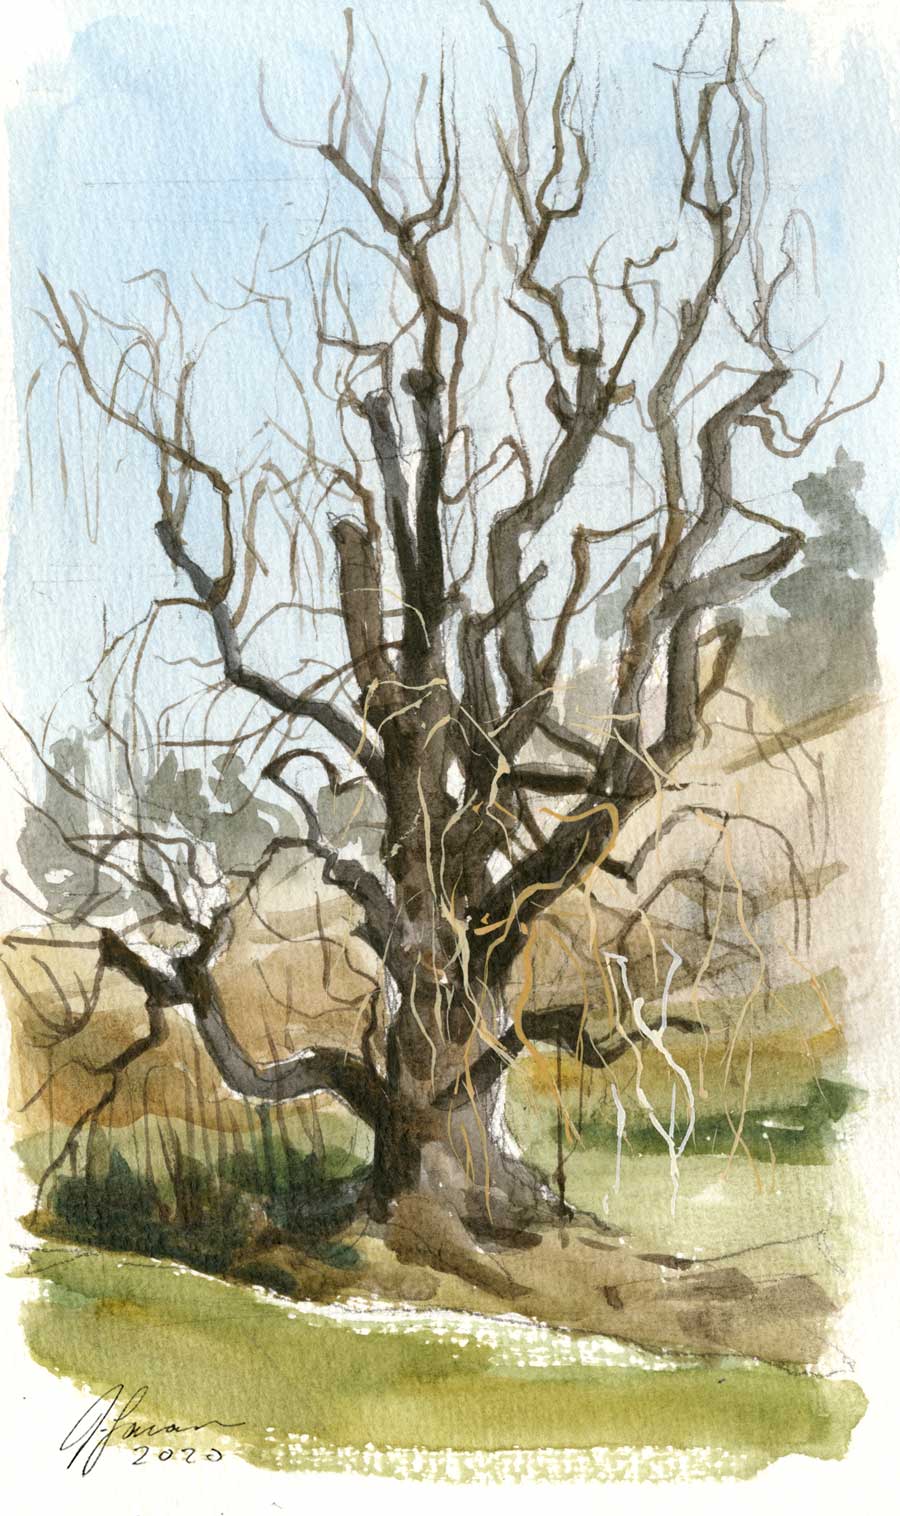 watercolor and gouache sketch of a willow tree with bare branches in a palette of brown and green